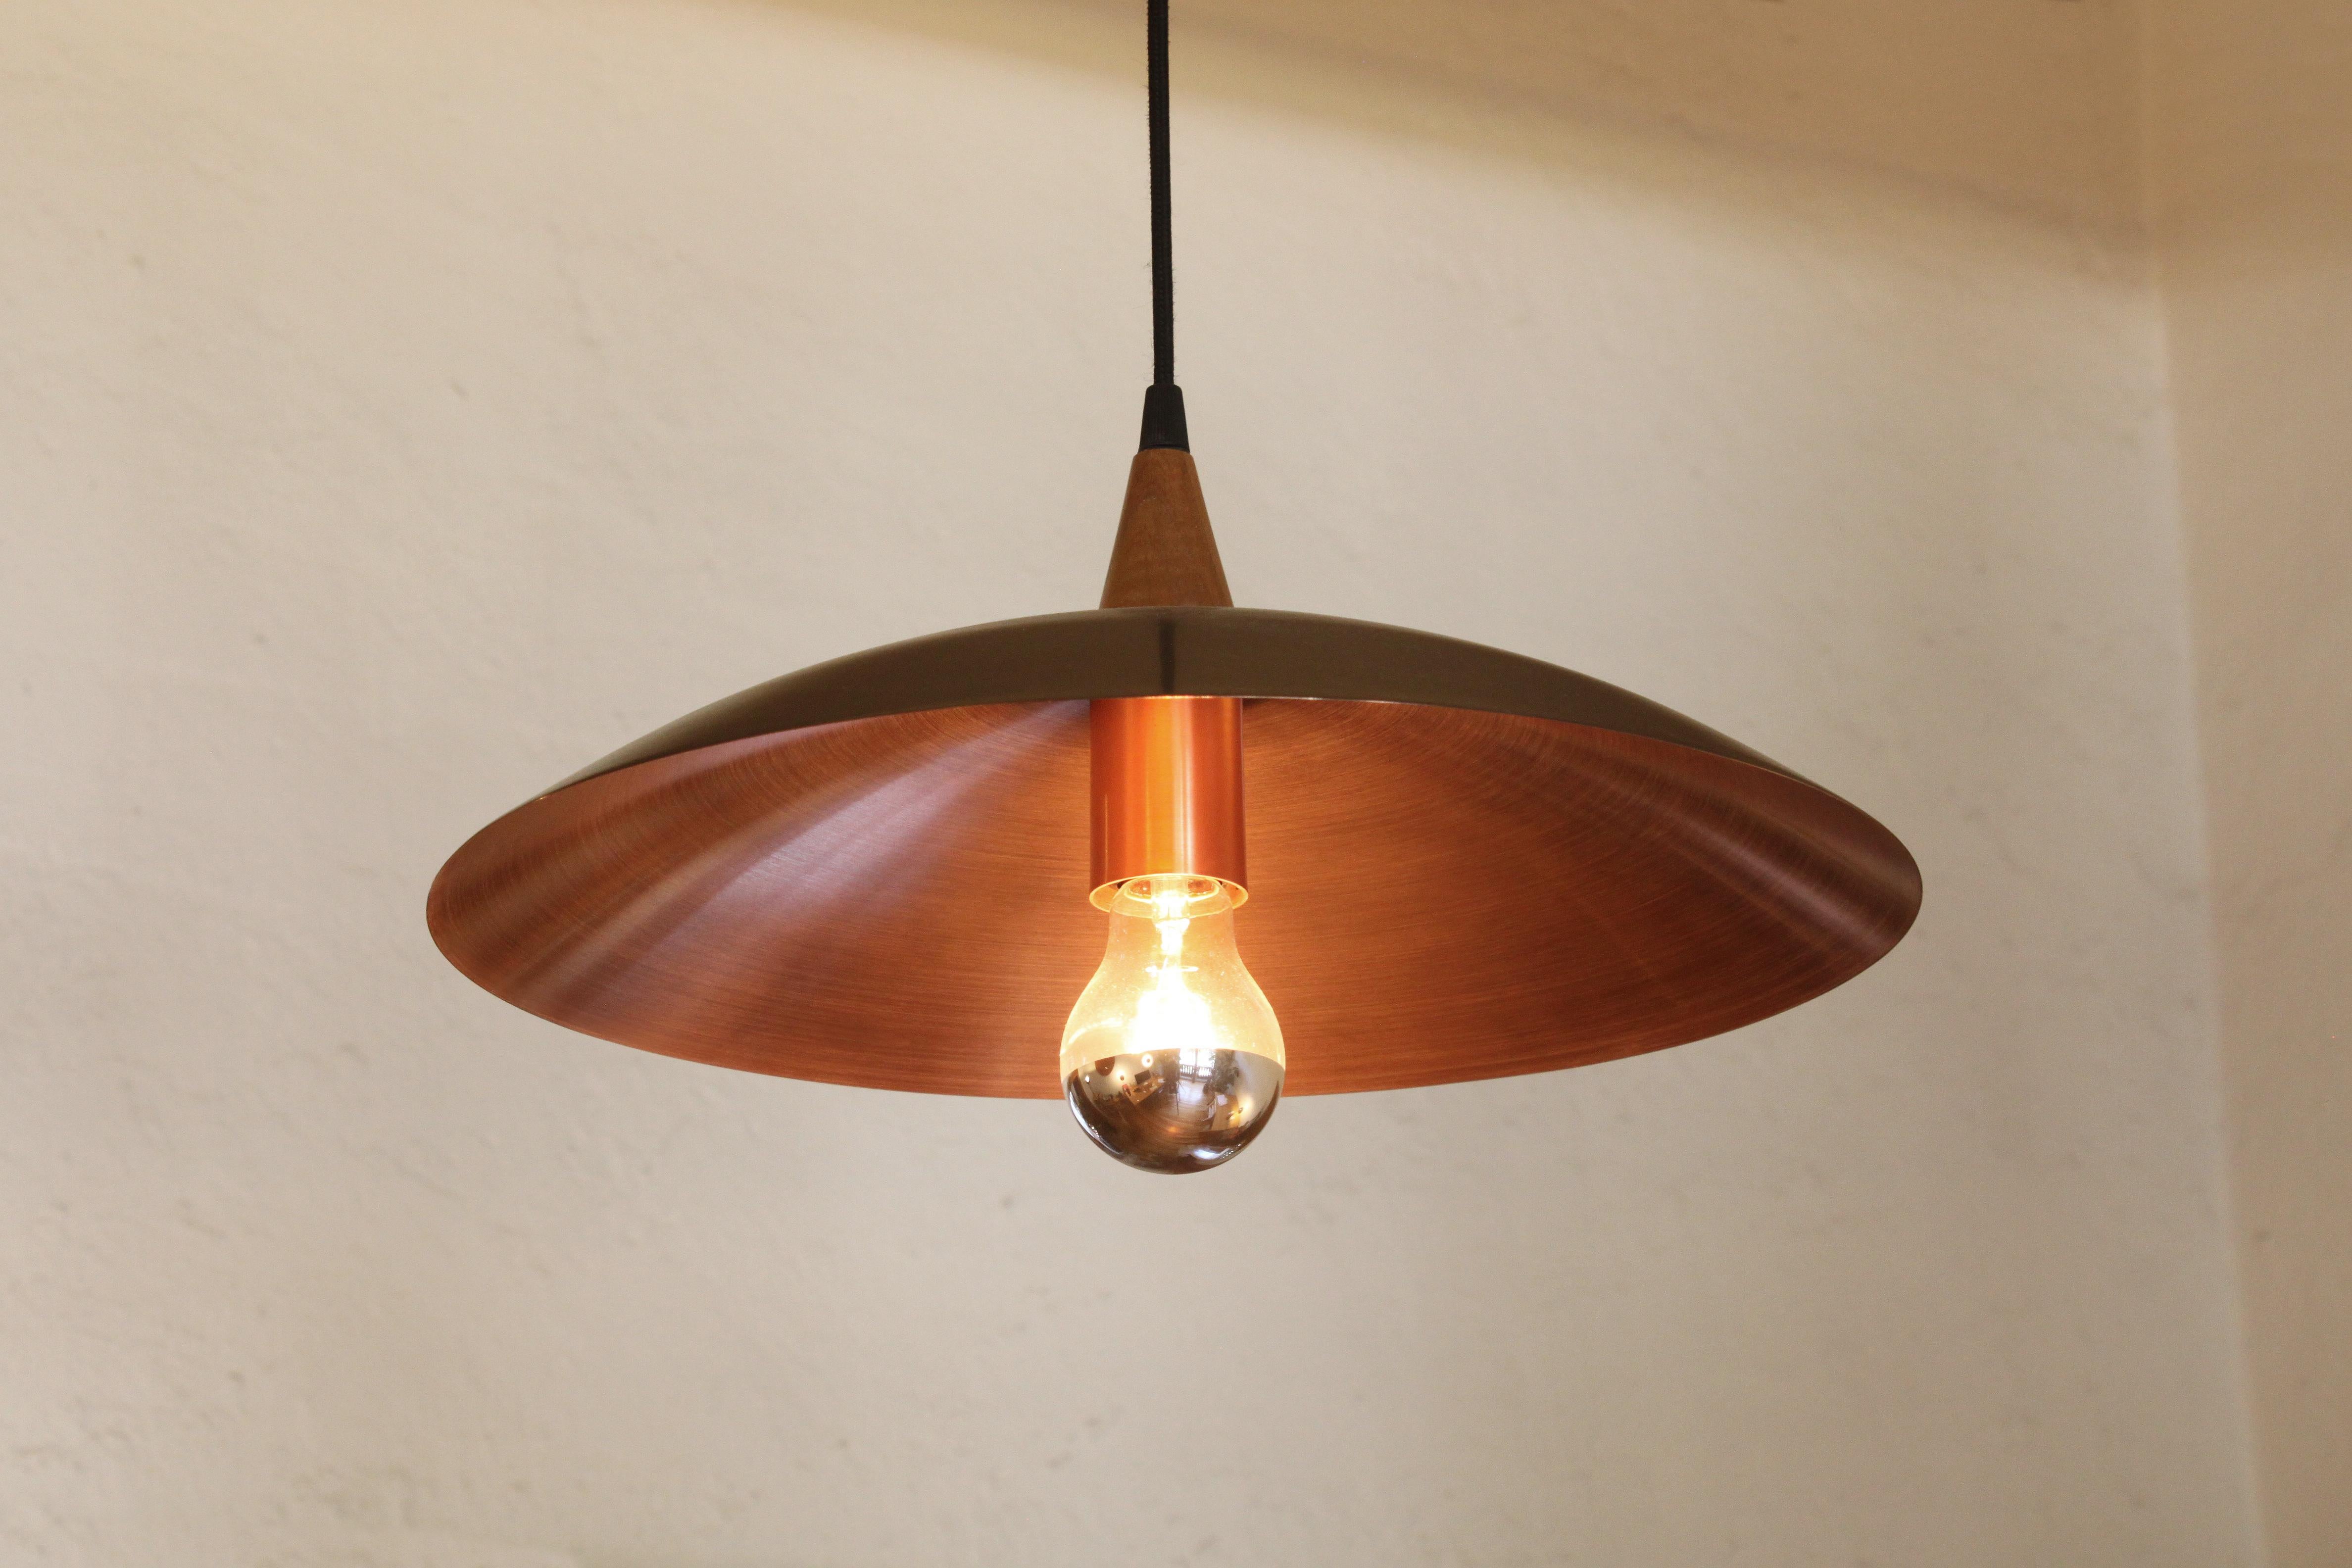 Plato Abajo is a ceiling lamp with dimmable feature (dimmer wall control is not included). The dome features a solid steel structure and wood detail. The dome is connected to the ceiling with 3m black fabric cable. The cable length is adjustable.